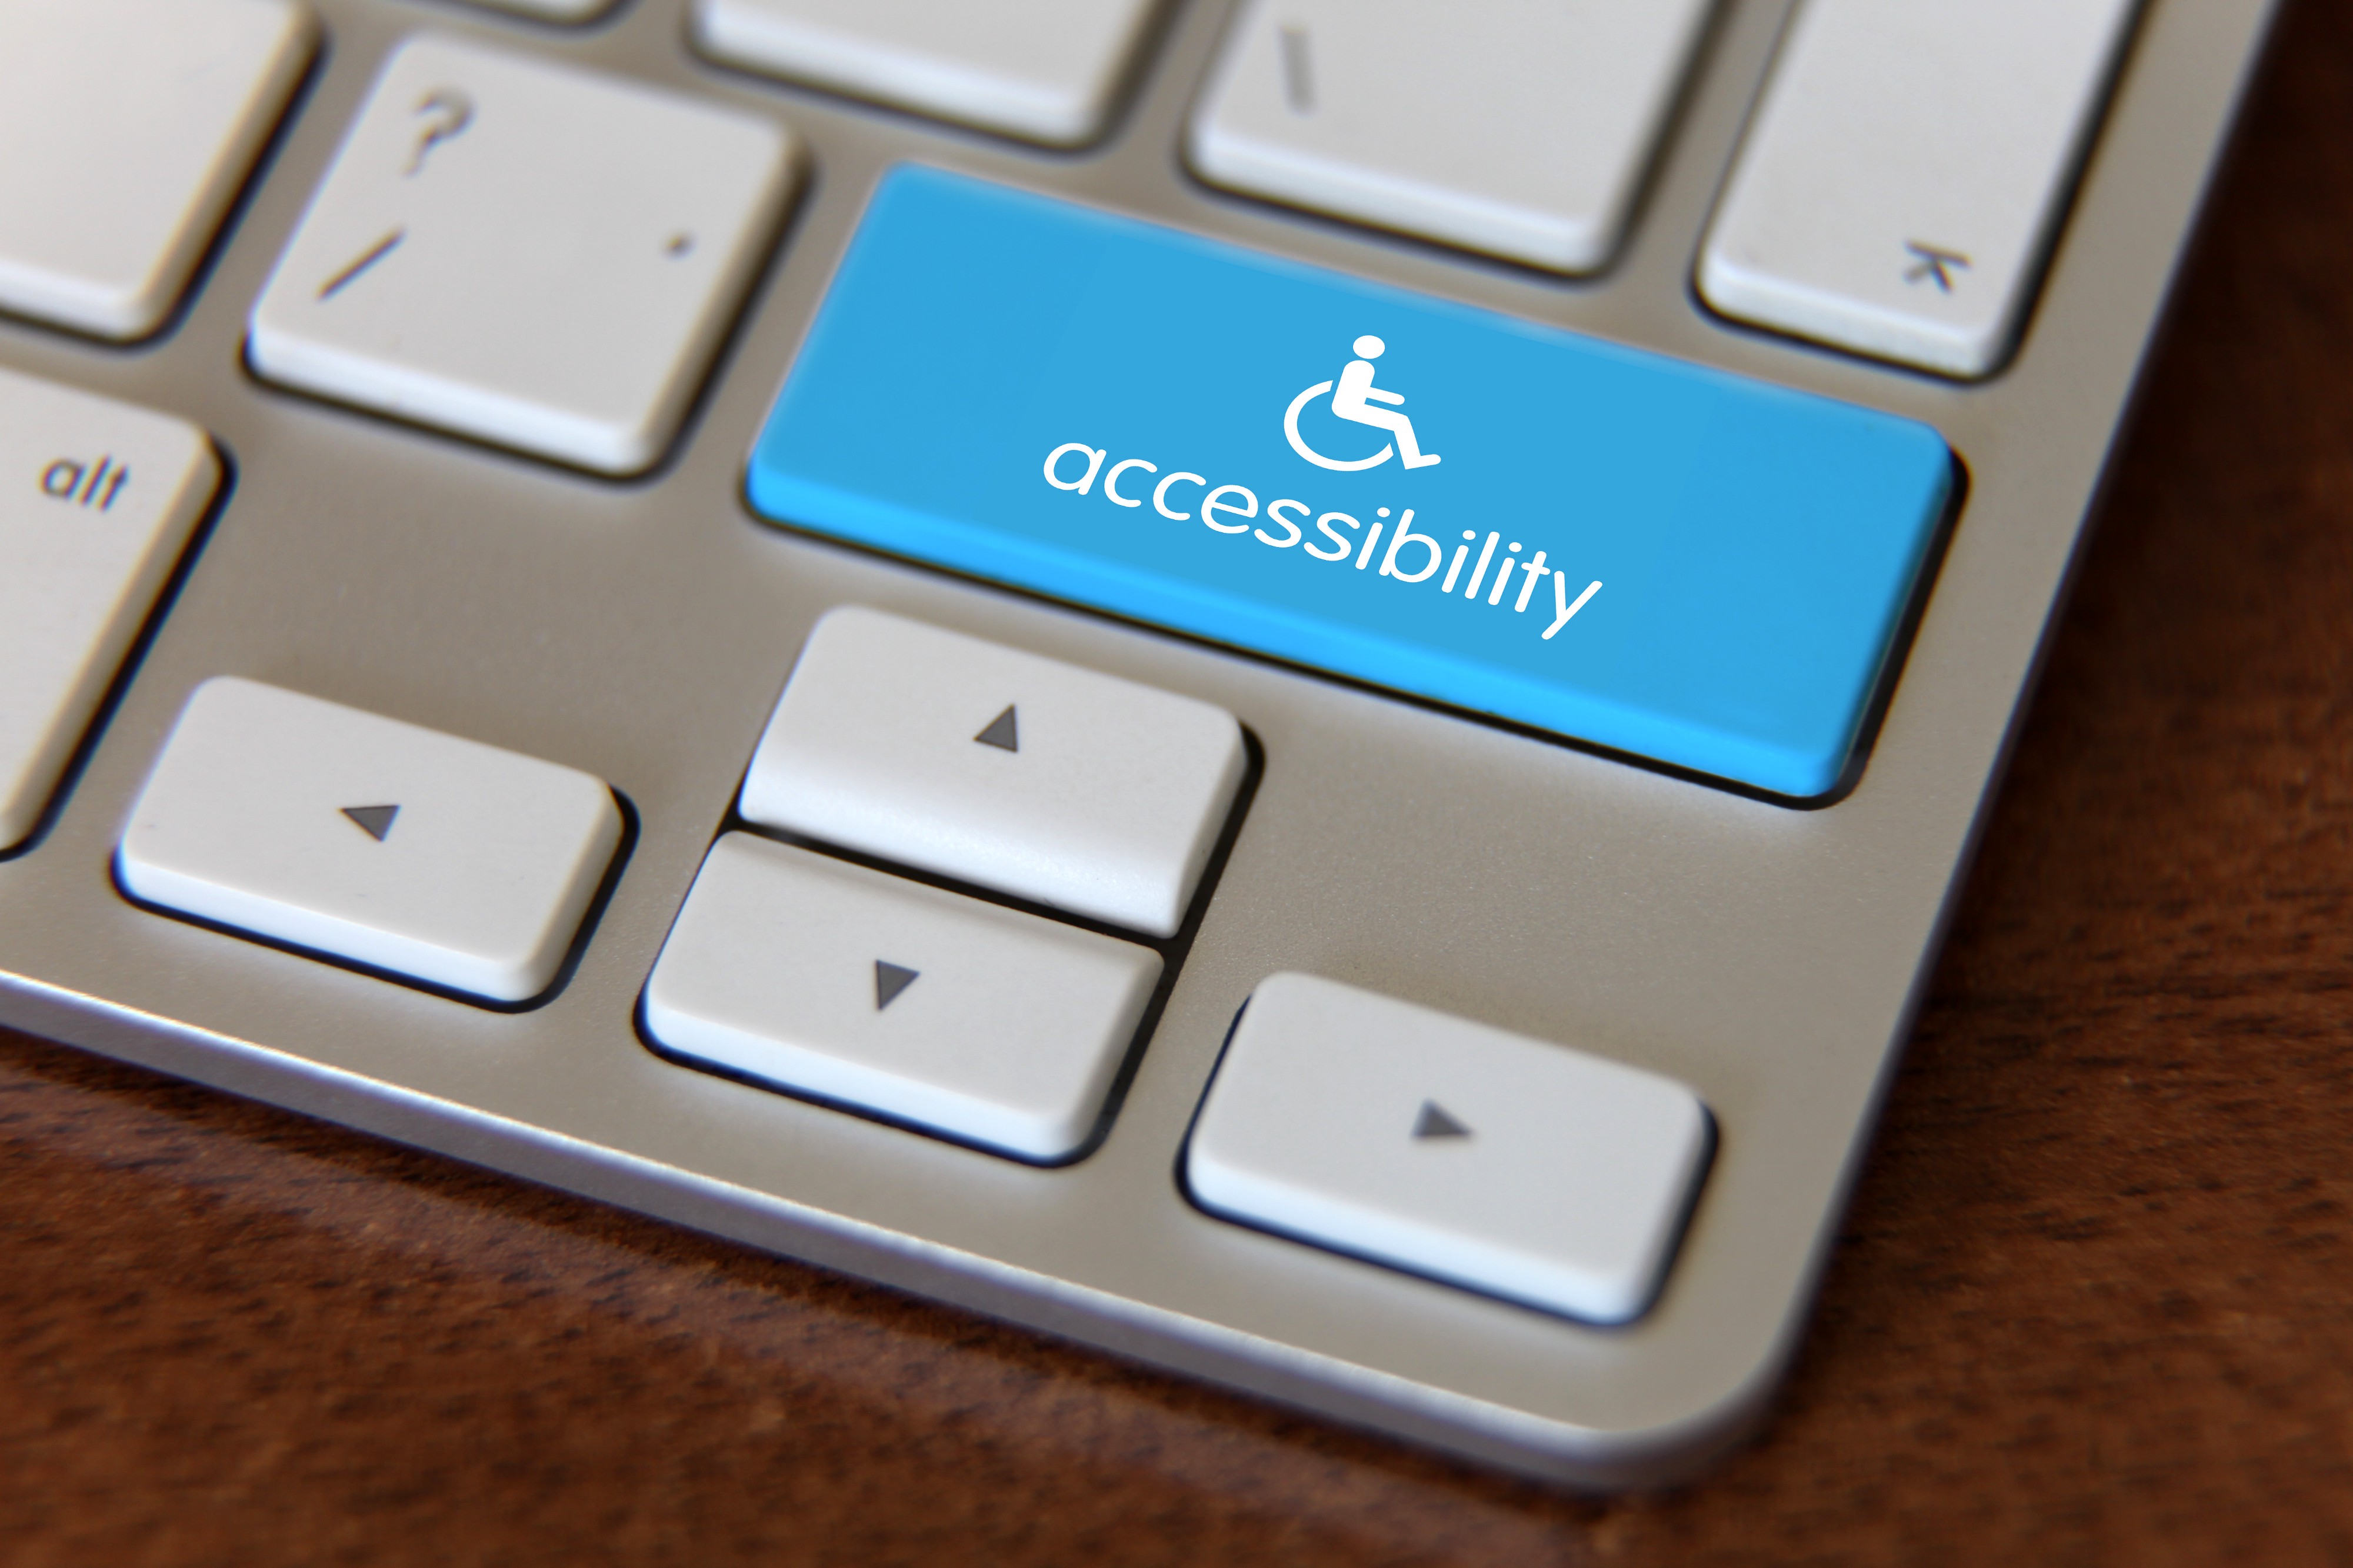 Computer keyboard with large blue key labeled "accessibility".